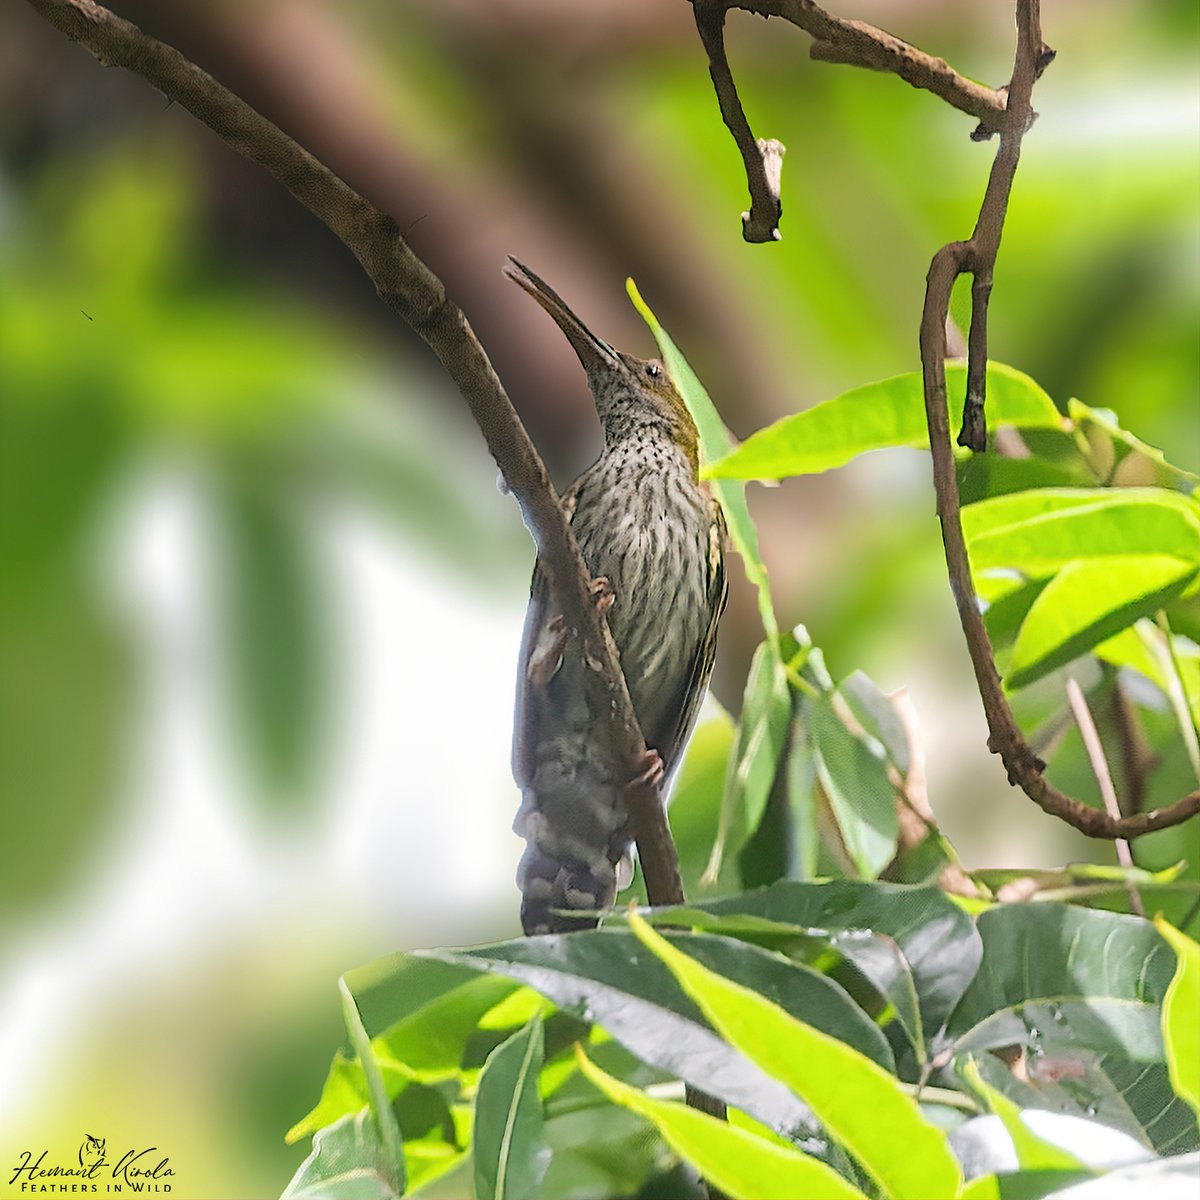 Today's special 'Nectar Feeding bills/beak' (Bill which help them to pulling nectar from deep inside flowers) Let's fill the X with Nectar Feeding birds. Streaky-breasted Spiderhunter #IndiAves #ThePhotoHour #Nectarbills